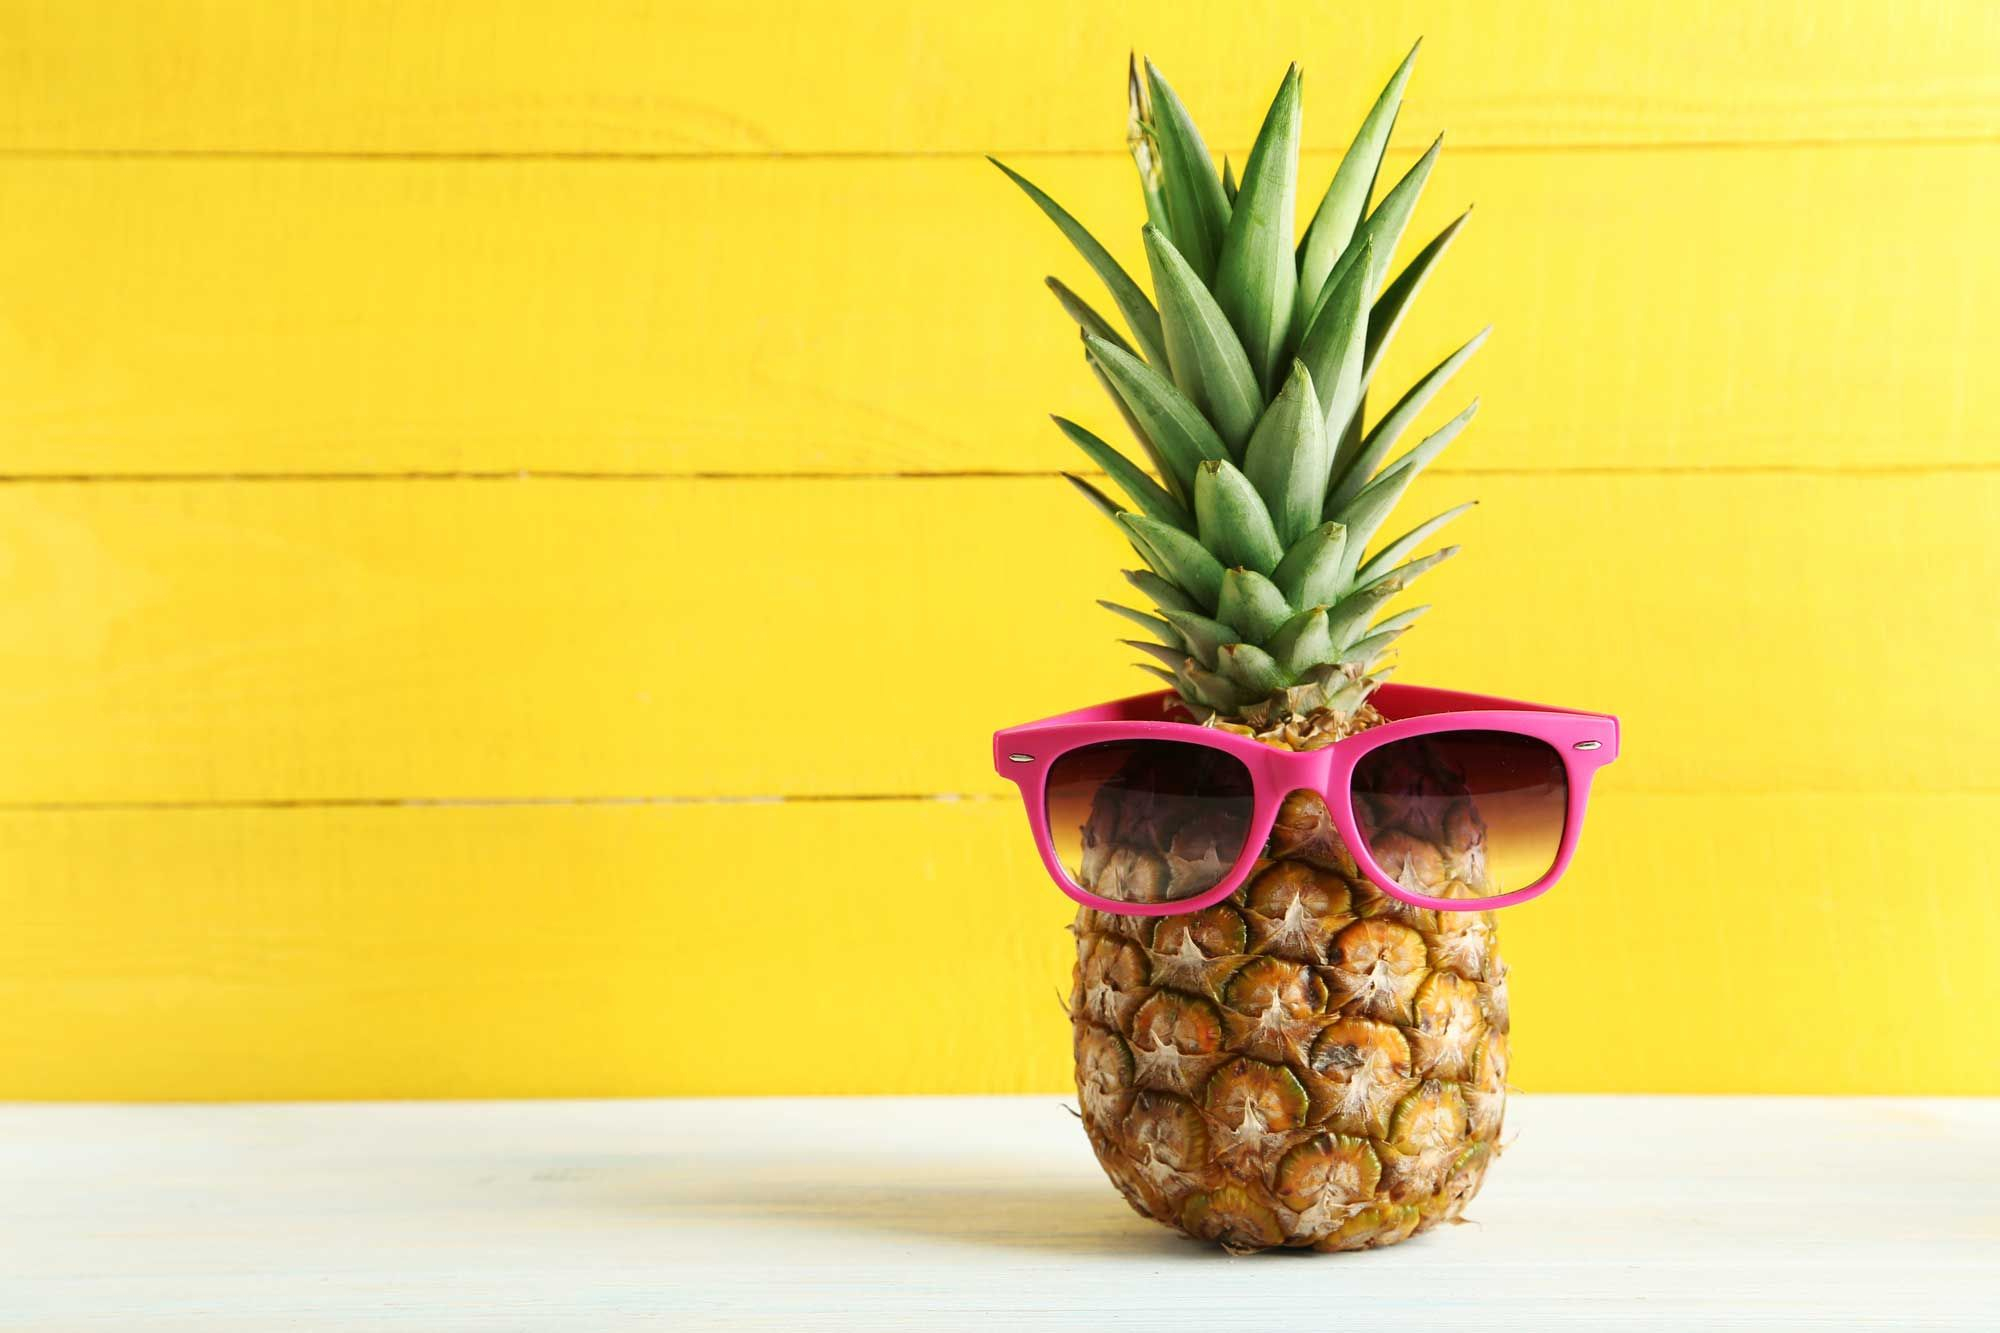 2000x1333 Pineapple with Sunglasses Wallpapers Top Free Pineapple with Sunglasses Backgrounds